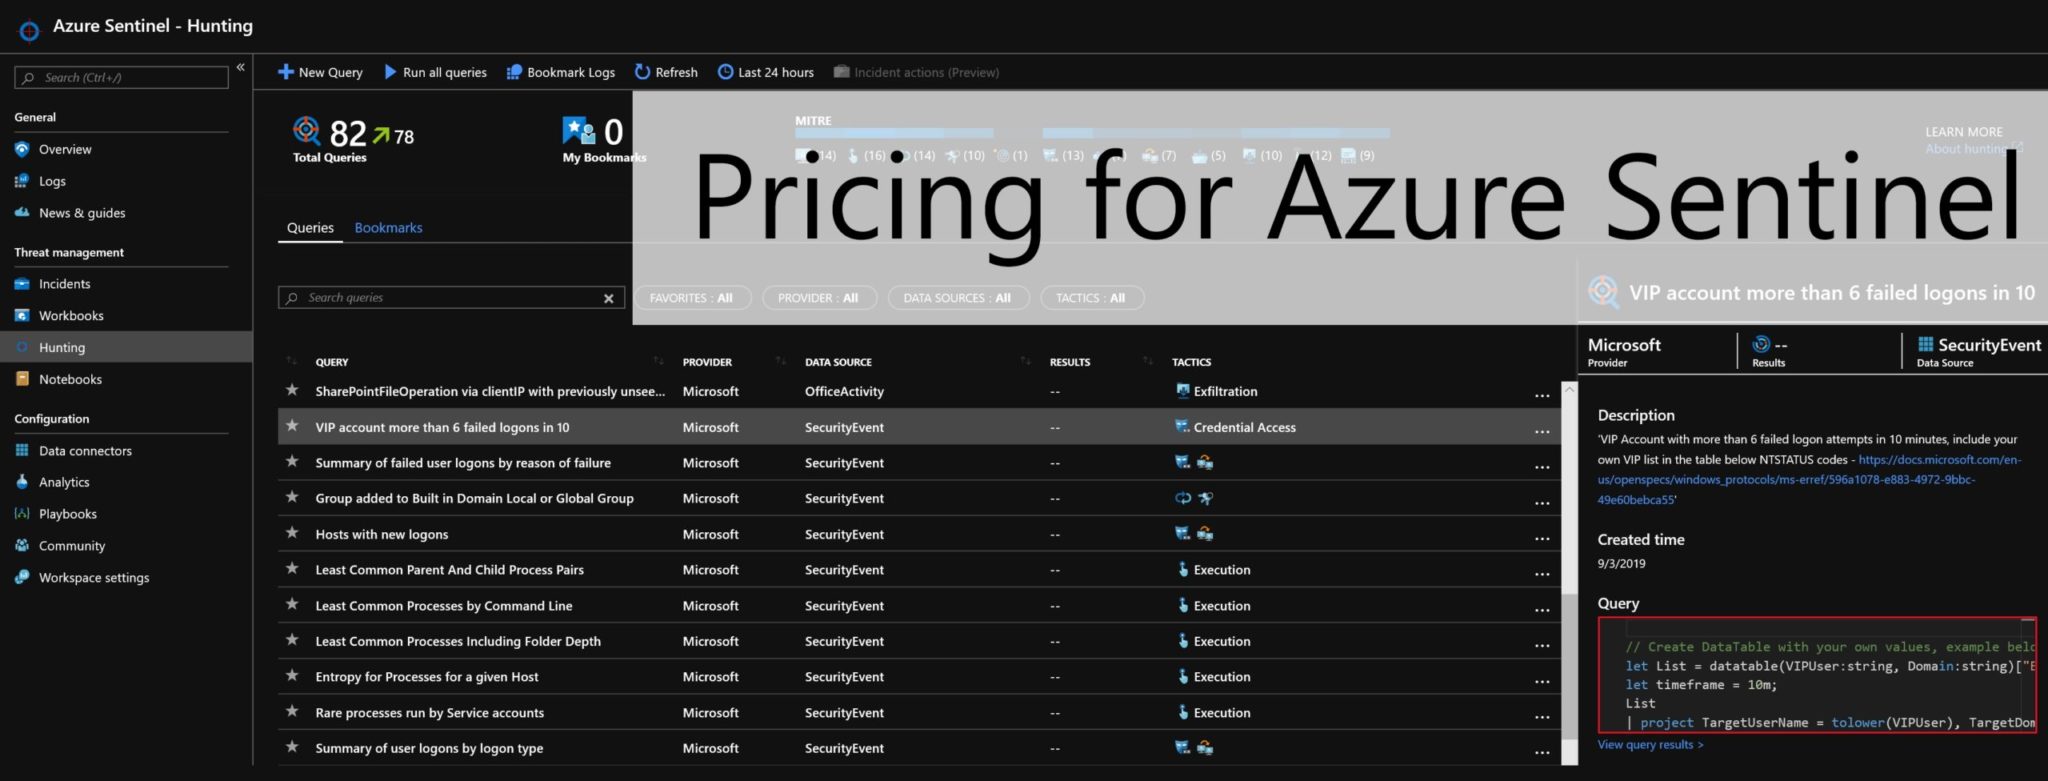 Pricing for Azure Sentinel is GA 10